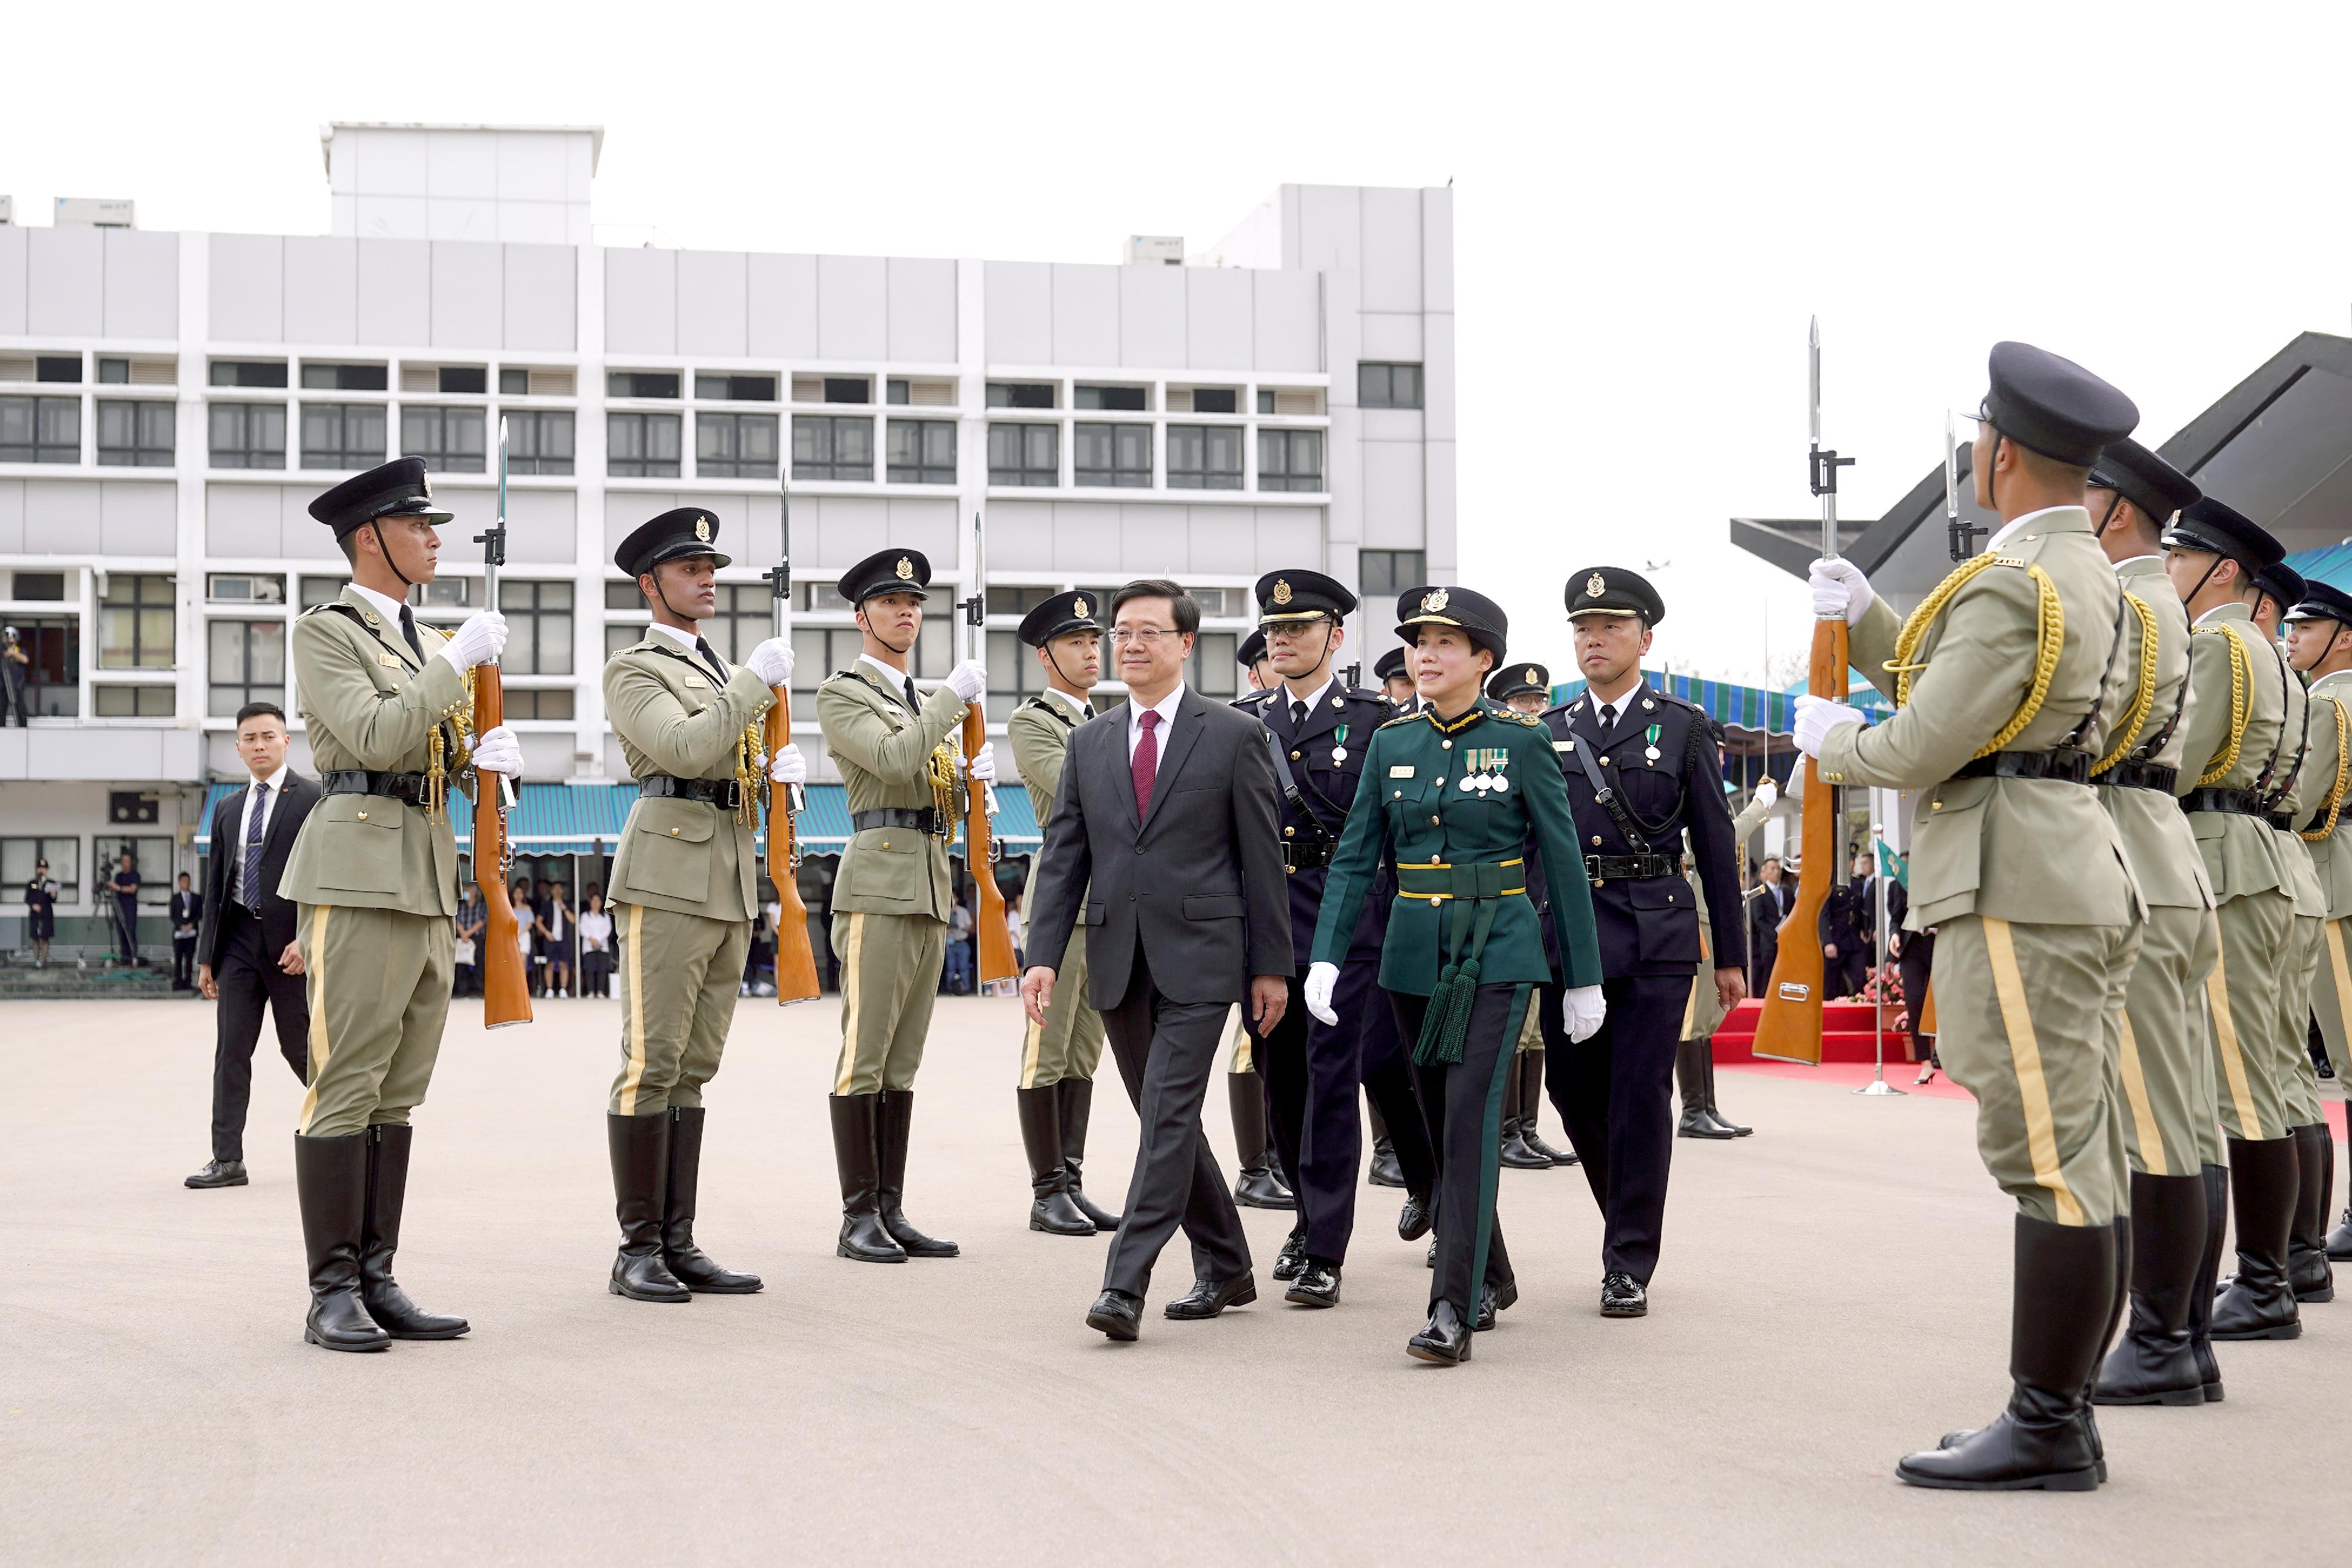 Hong Kong Customs Passing-out Parade was held today (March 24). Photo shows the Chief Executive, Mr John Lee (front row, left), inspecting the parade with the Commissioner of Customs and Excise, Ms Louise Ho (front row, right).